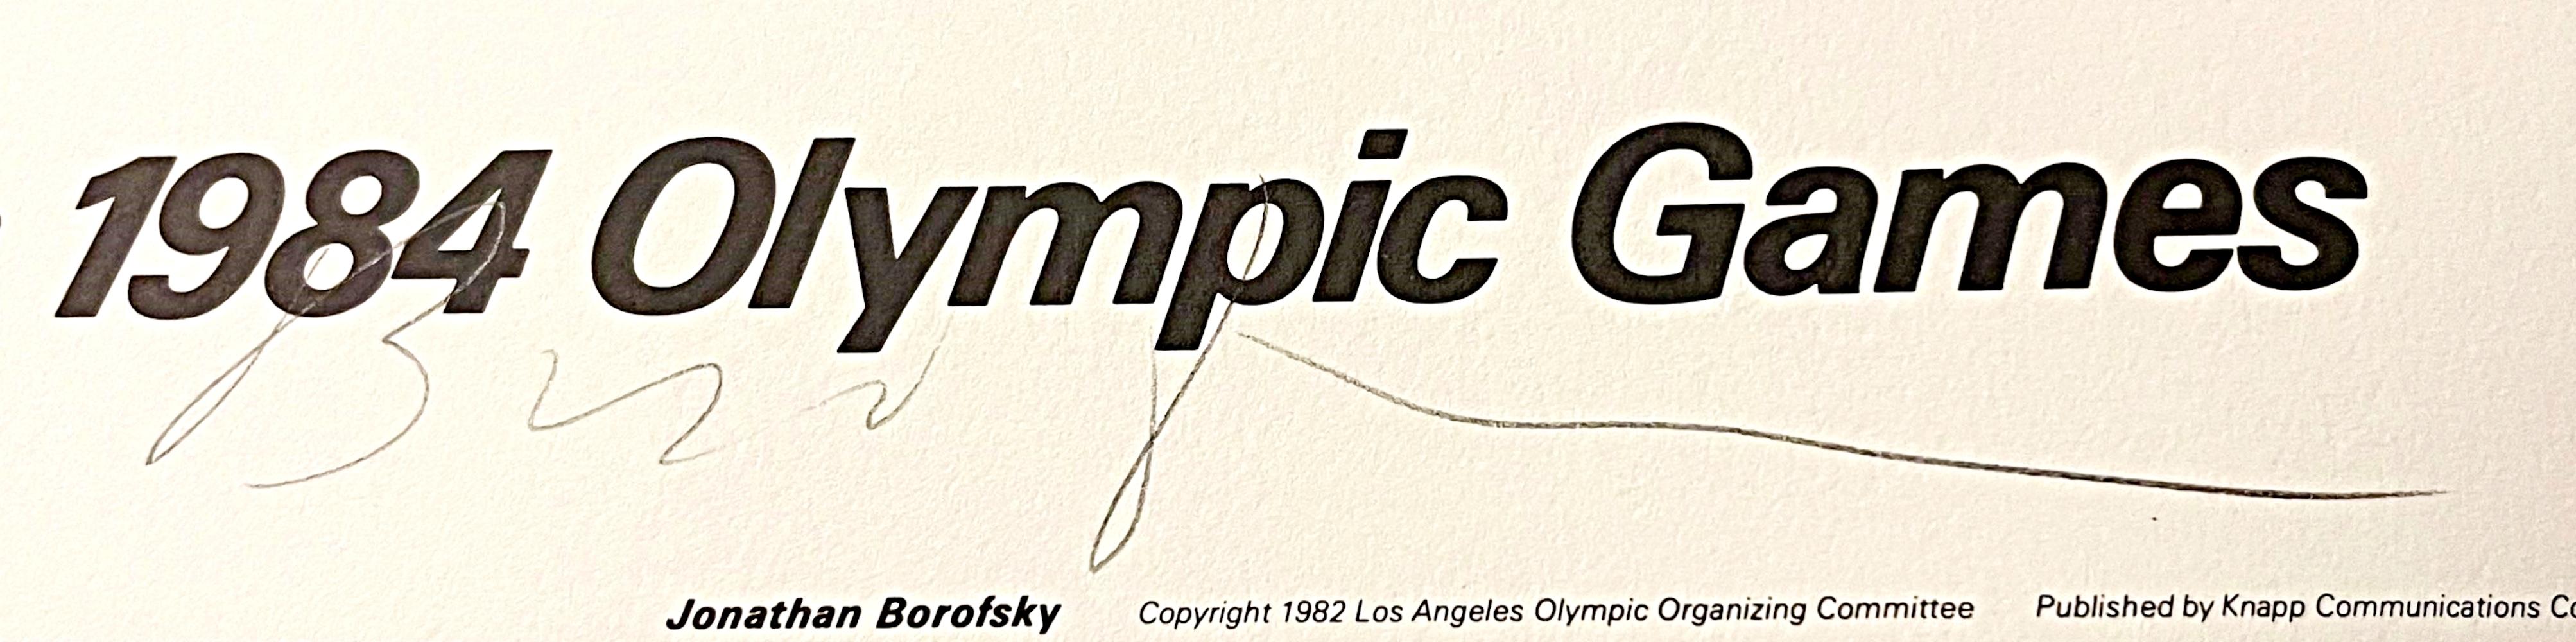 Los Angeles 1984 Olympic Games (Hand Signed with Olympic Committee COA) - Print by Jonathan Borofsky